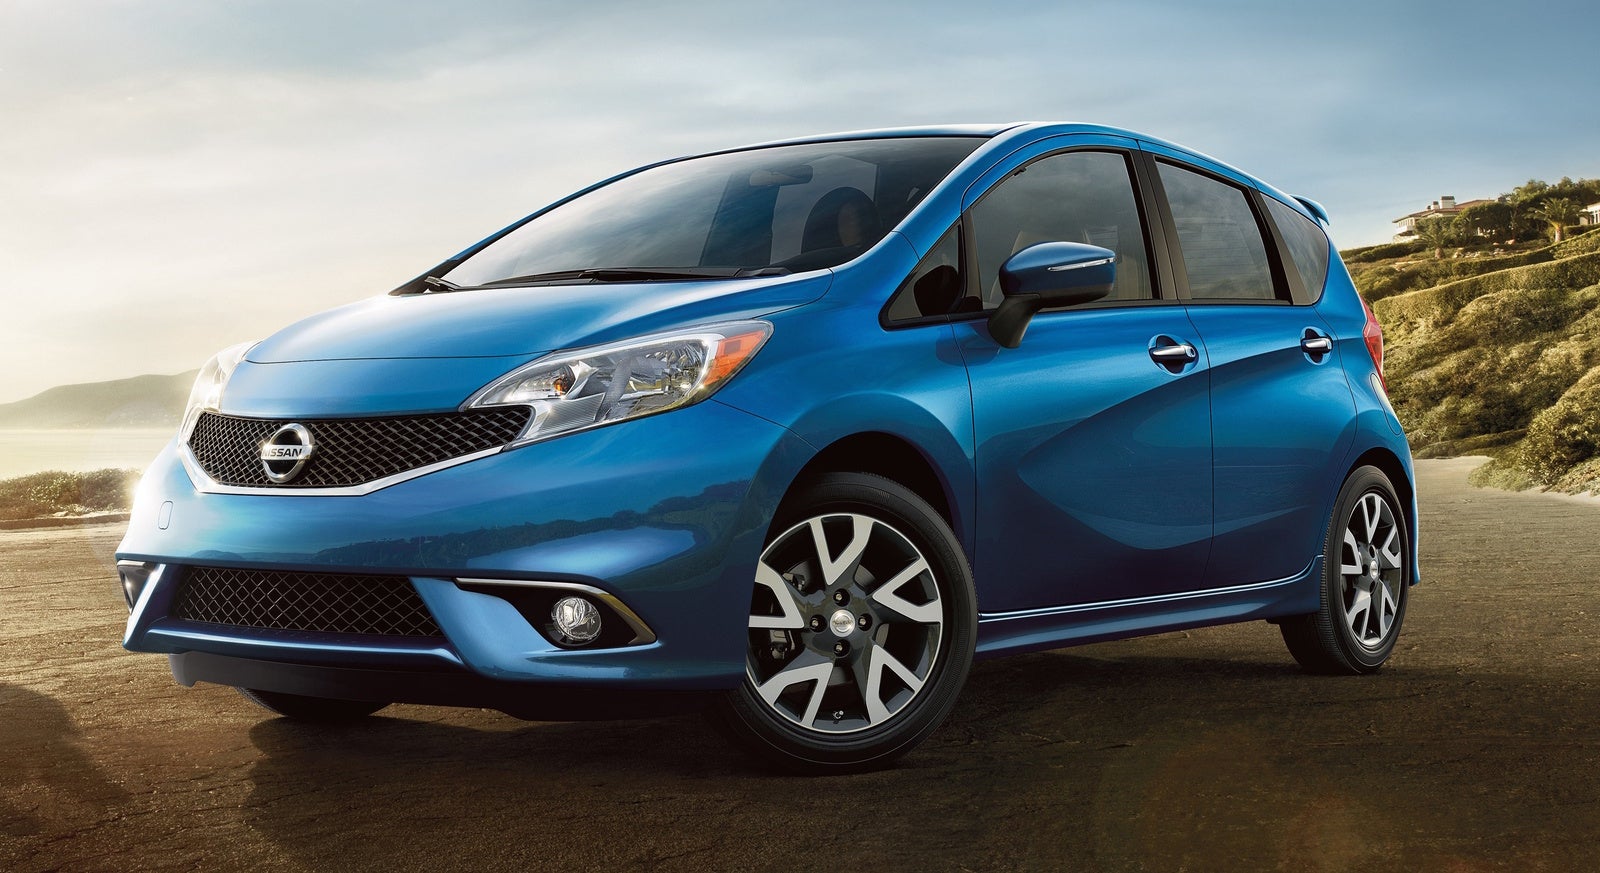 How To Operate The Ventilation System In A Nissan Versa Note 2016